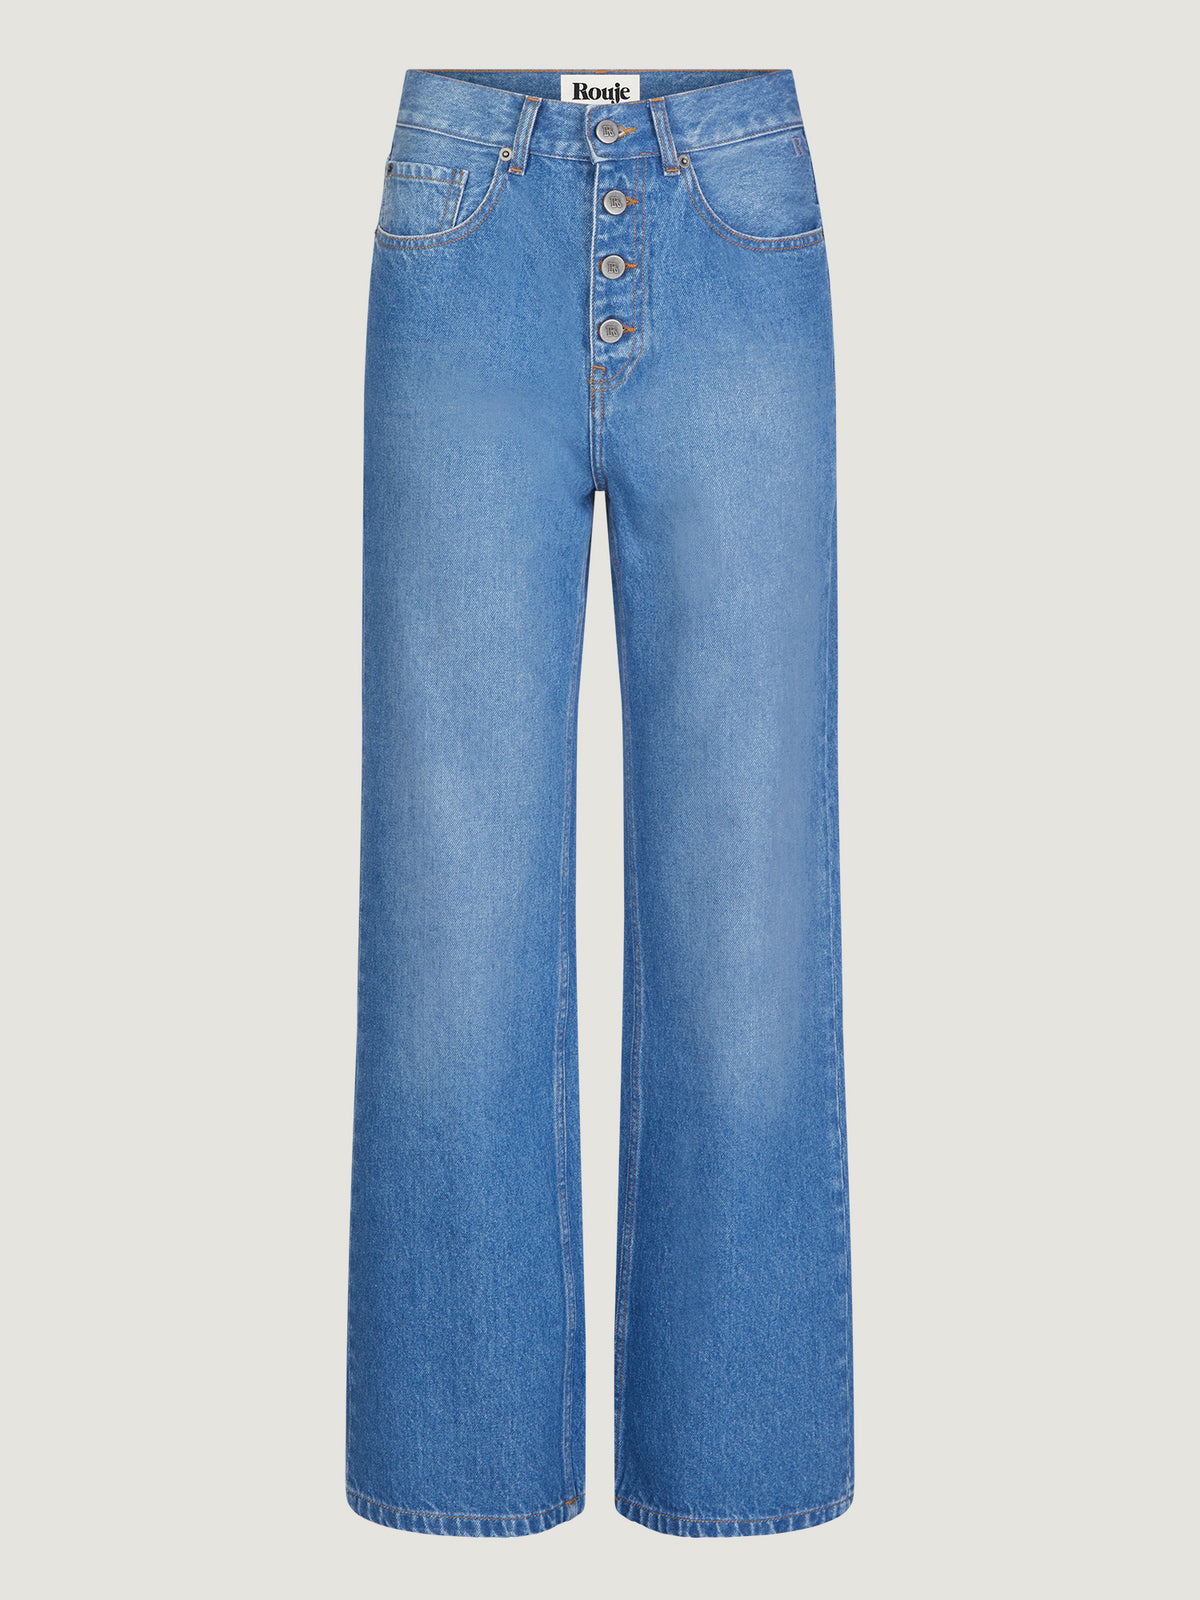 Long flare jeans with front pockets | Rouje • Rouje Paris